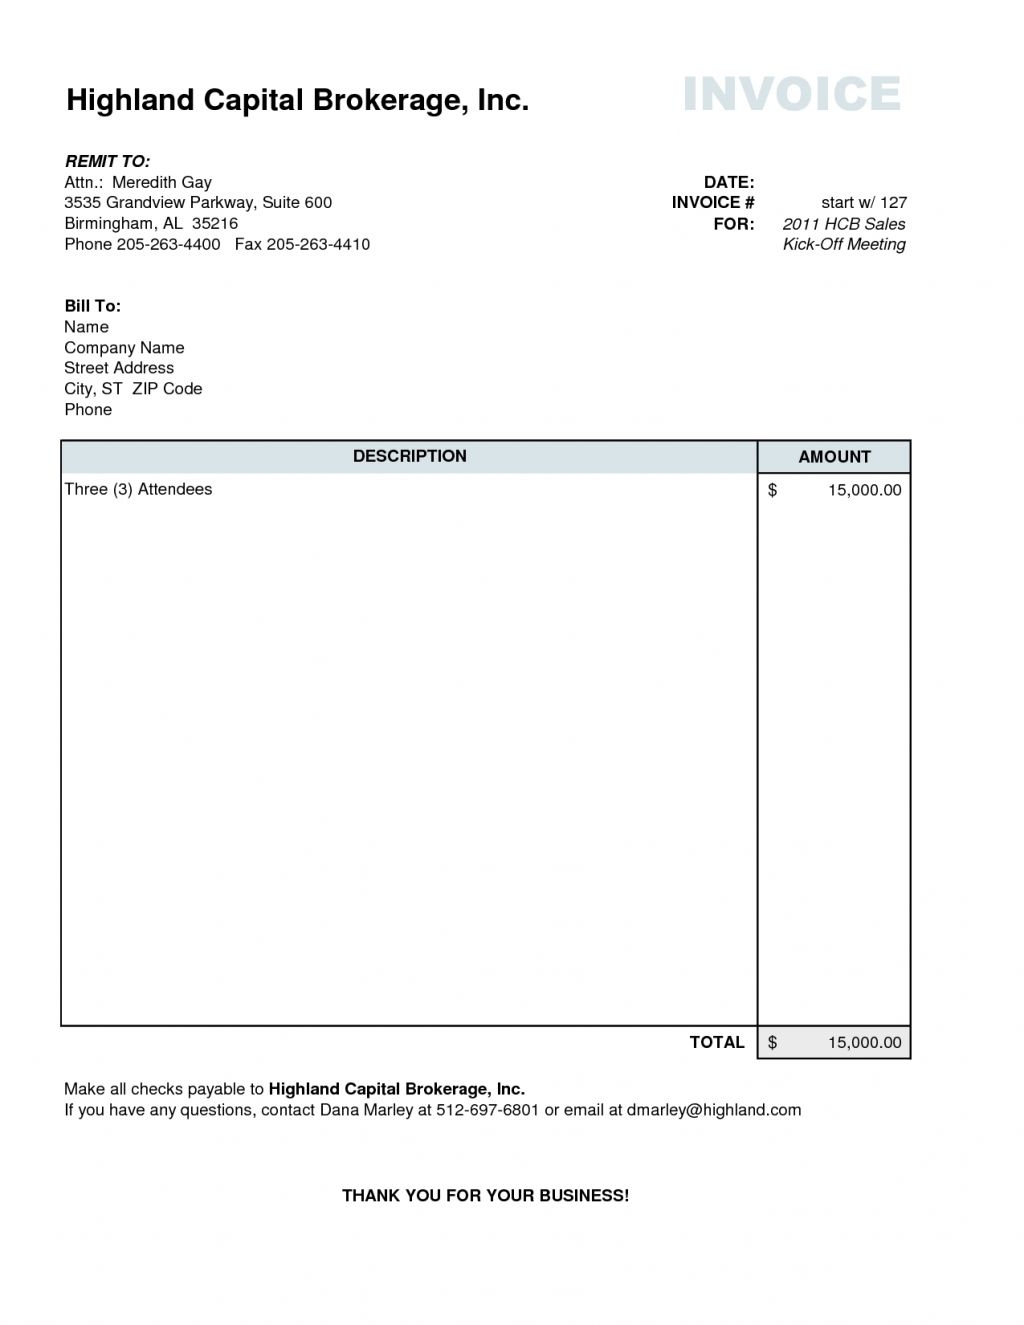 Copy Of An Invoice Template * Invoice Template Ideas